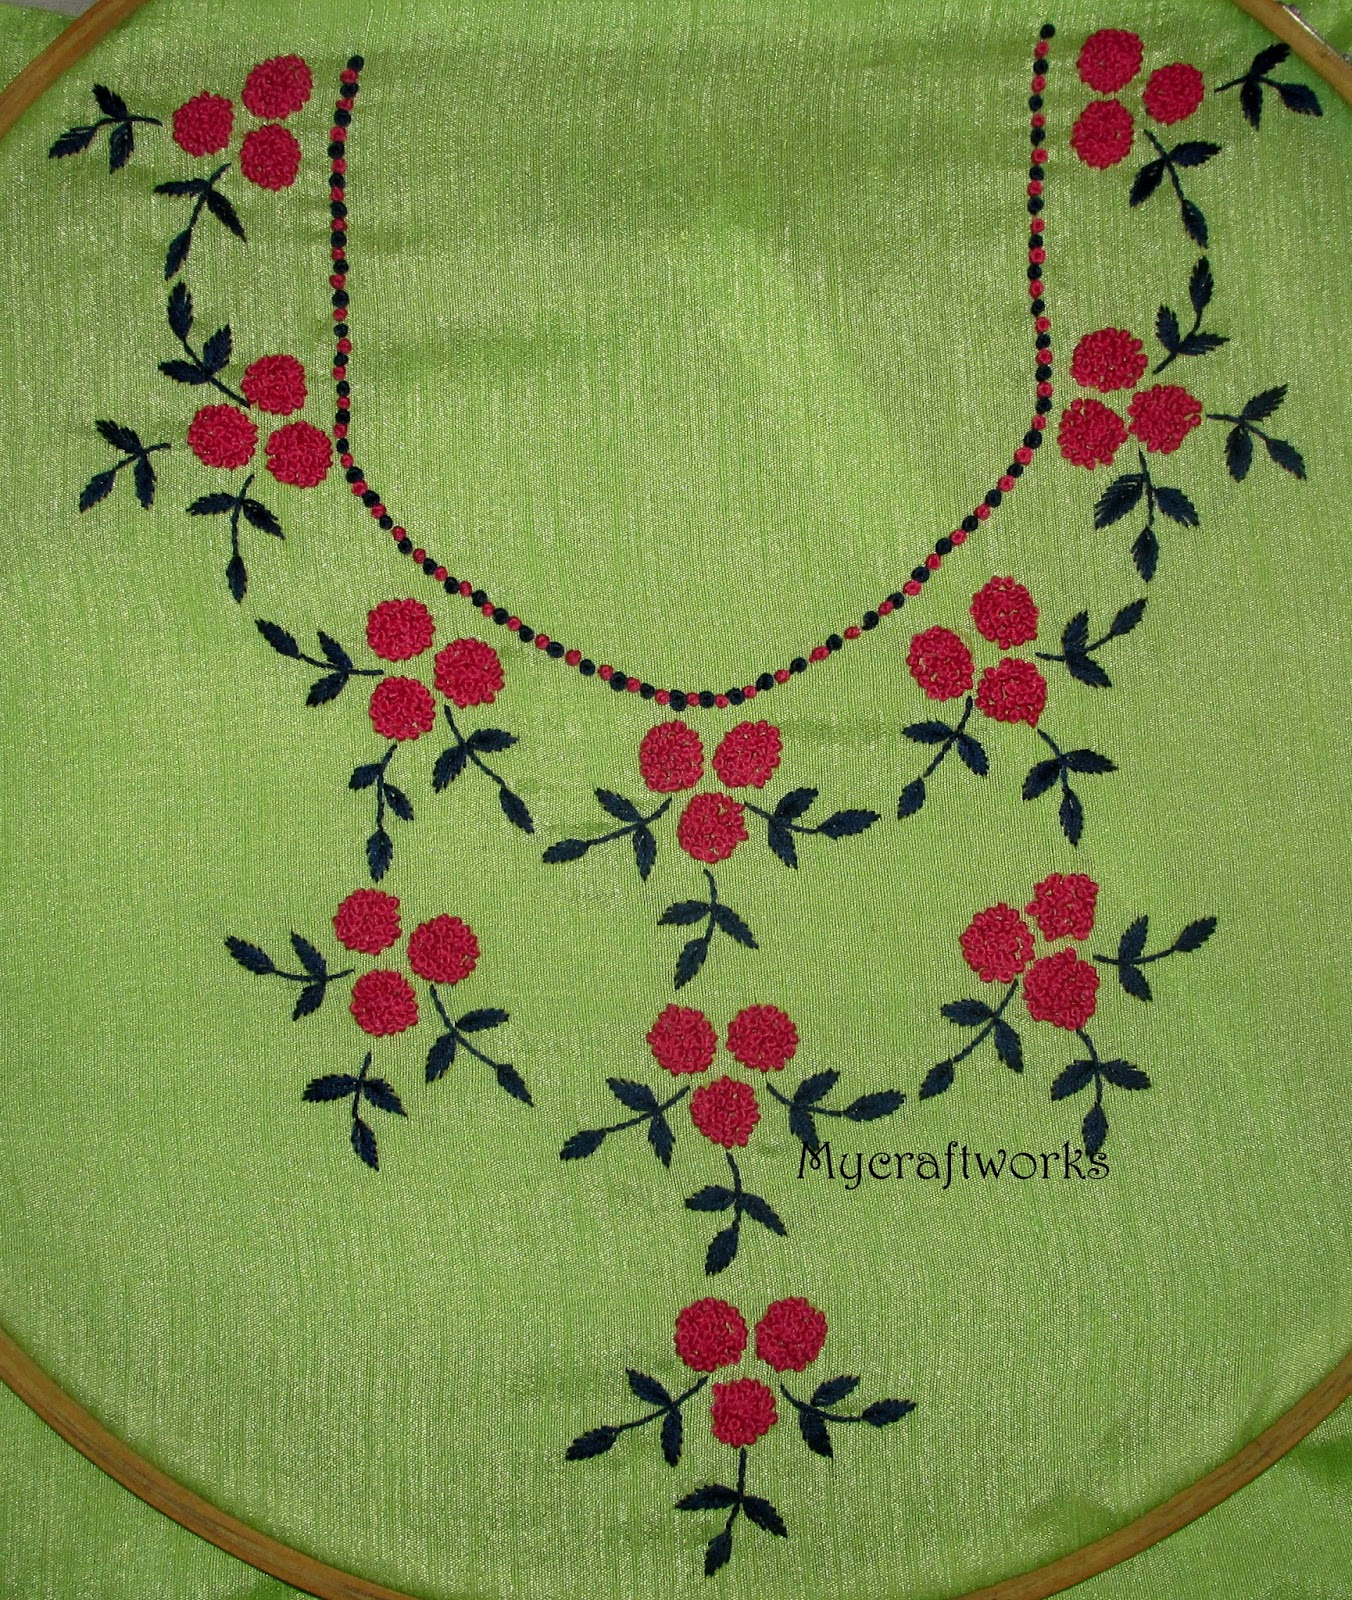 French Knots Embroidery Patterns My Craft Works Embroidery Pattern 4 French Knots Neck Design